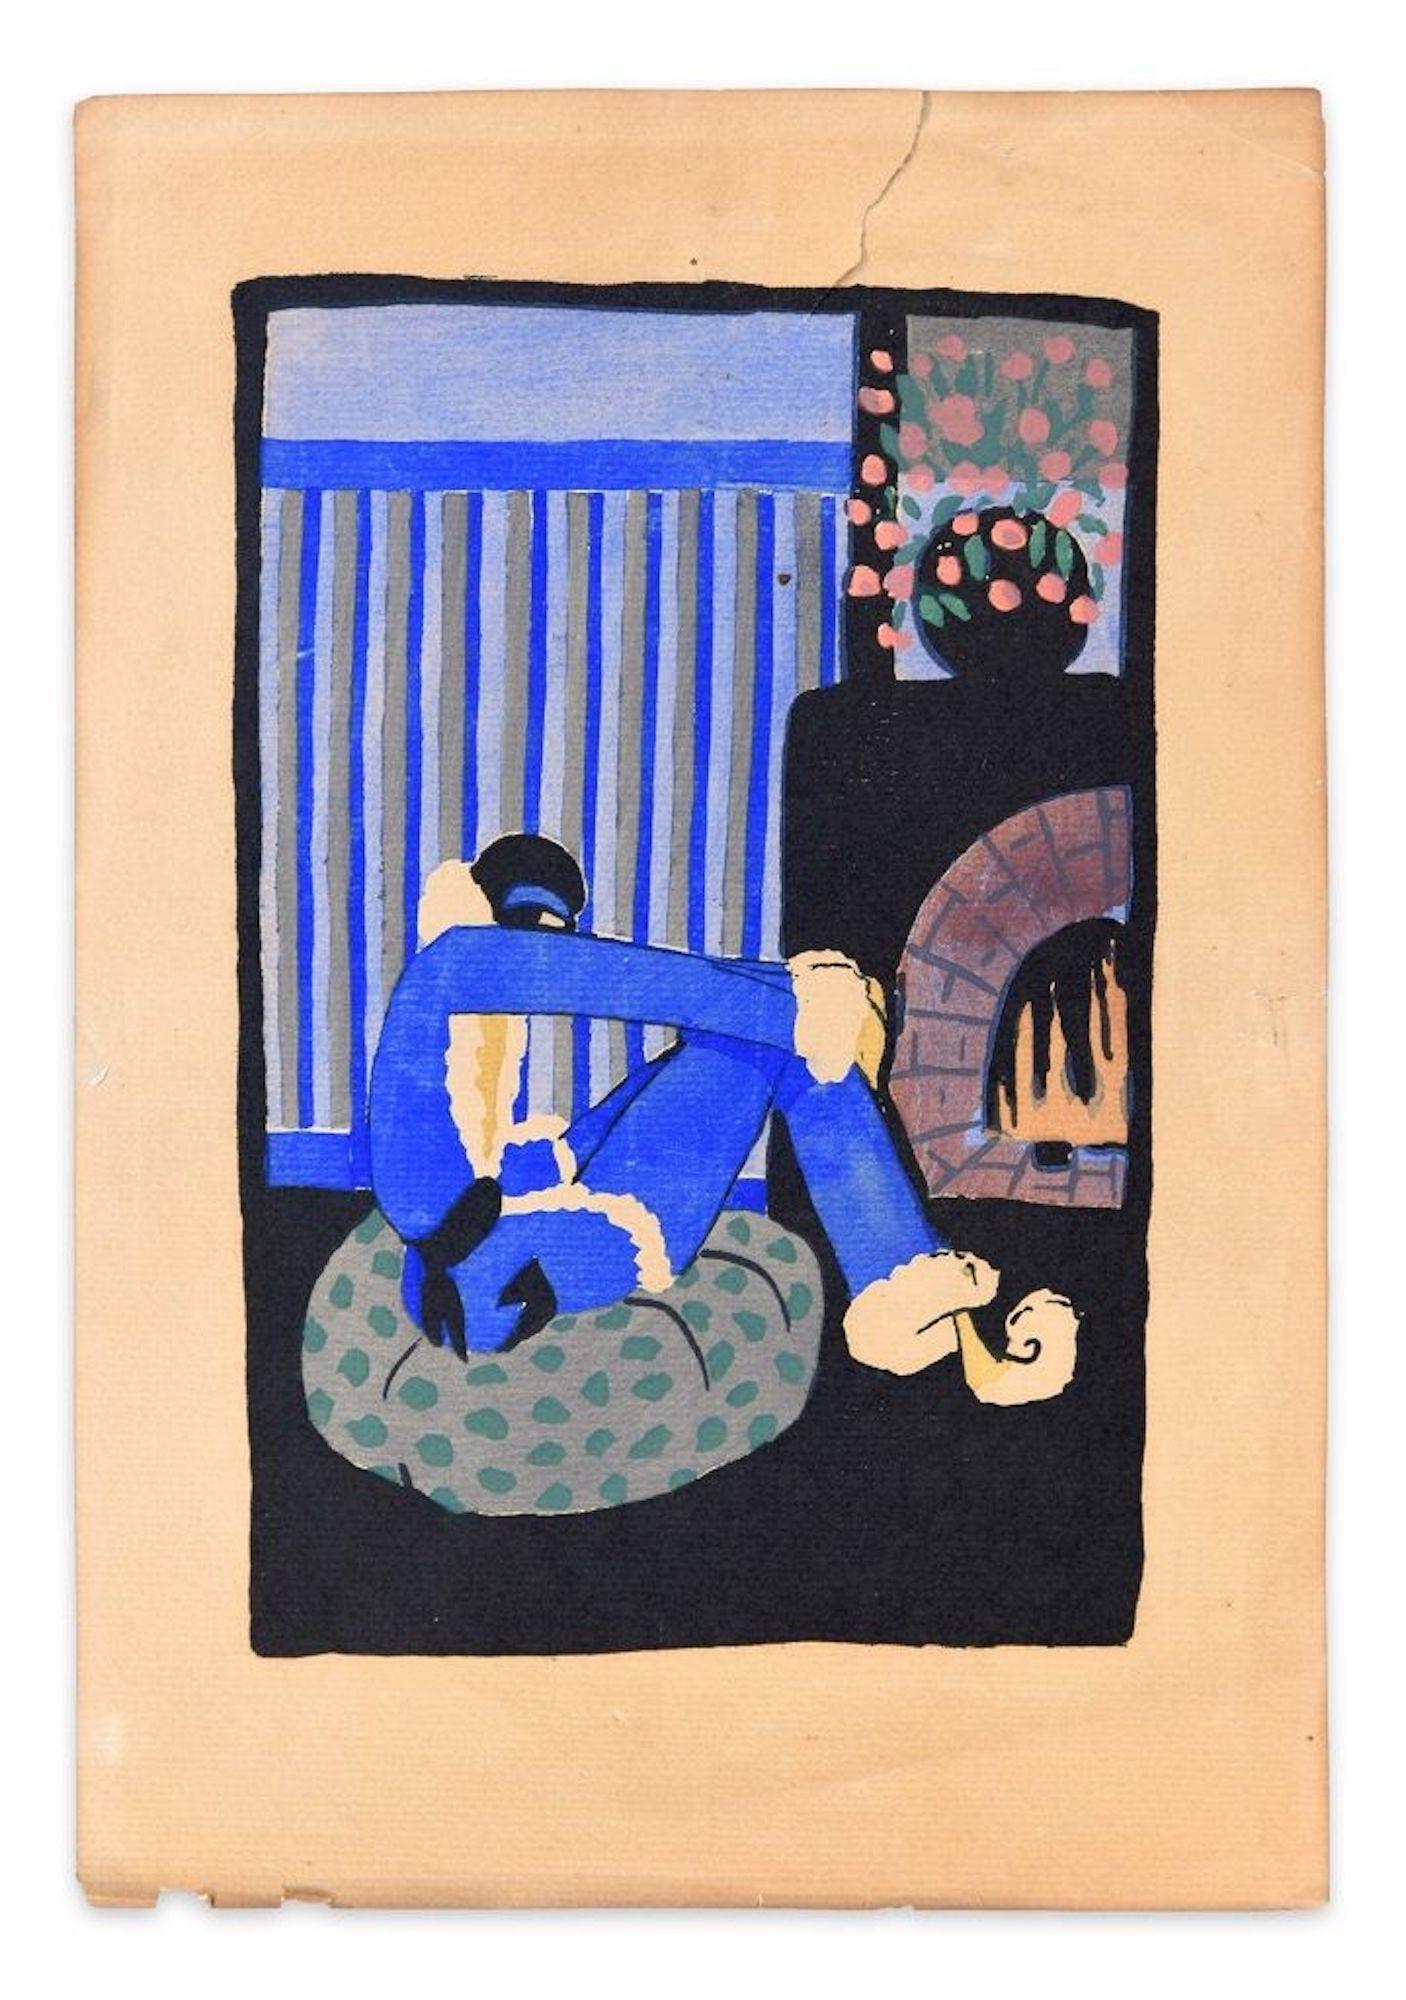 Blue Christmas - Woodcut Hand Colored in Tempera on Paper - Art Deco - 1920s